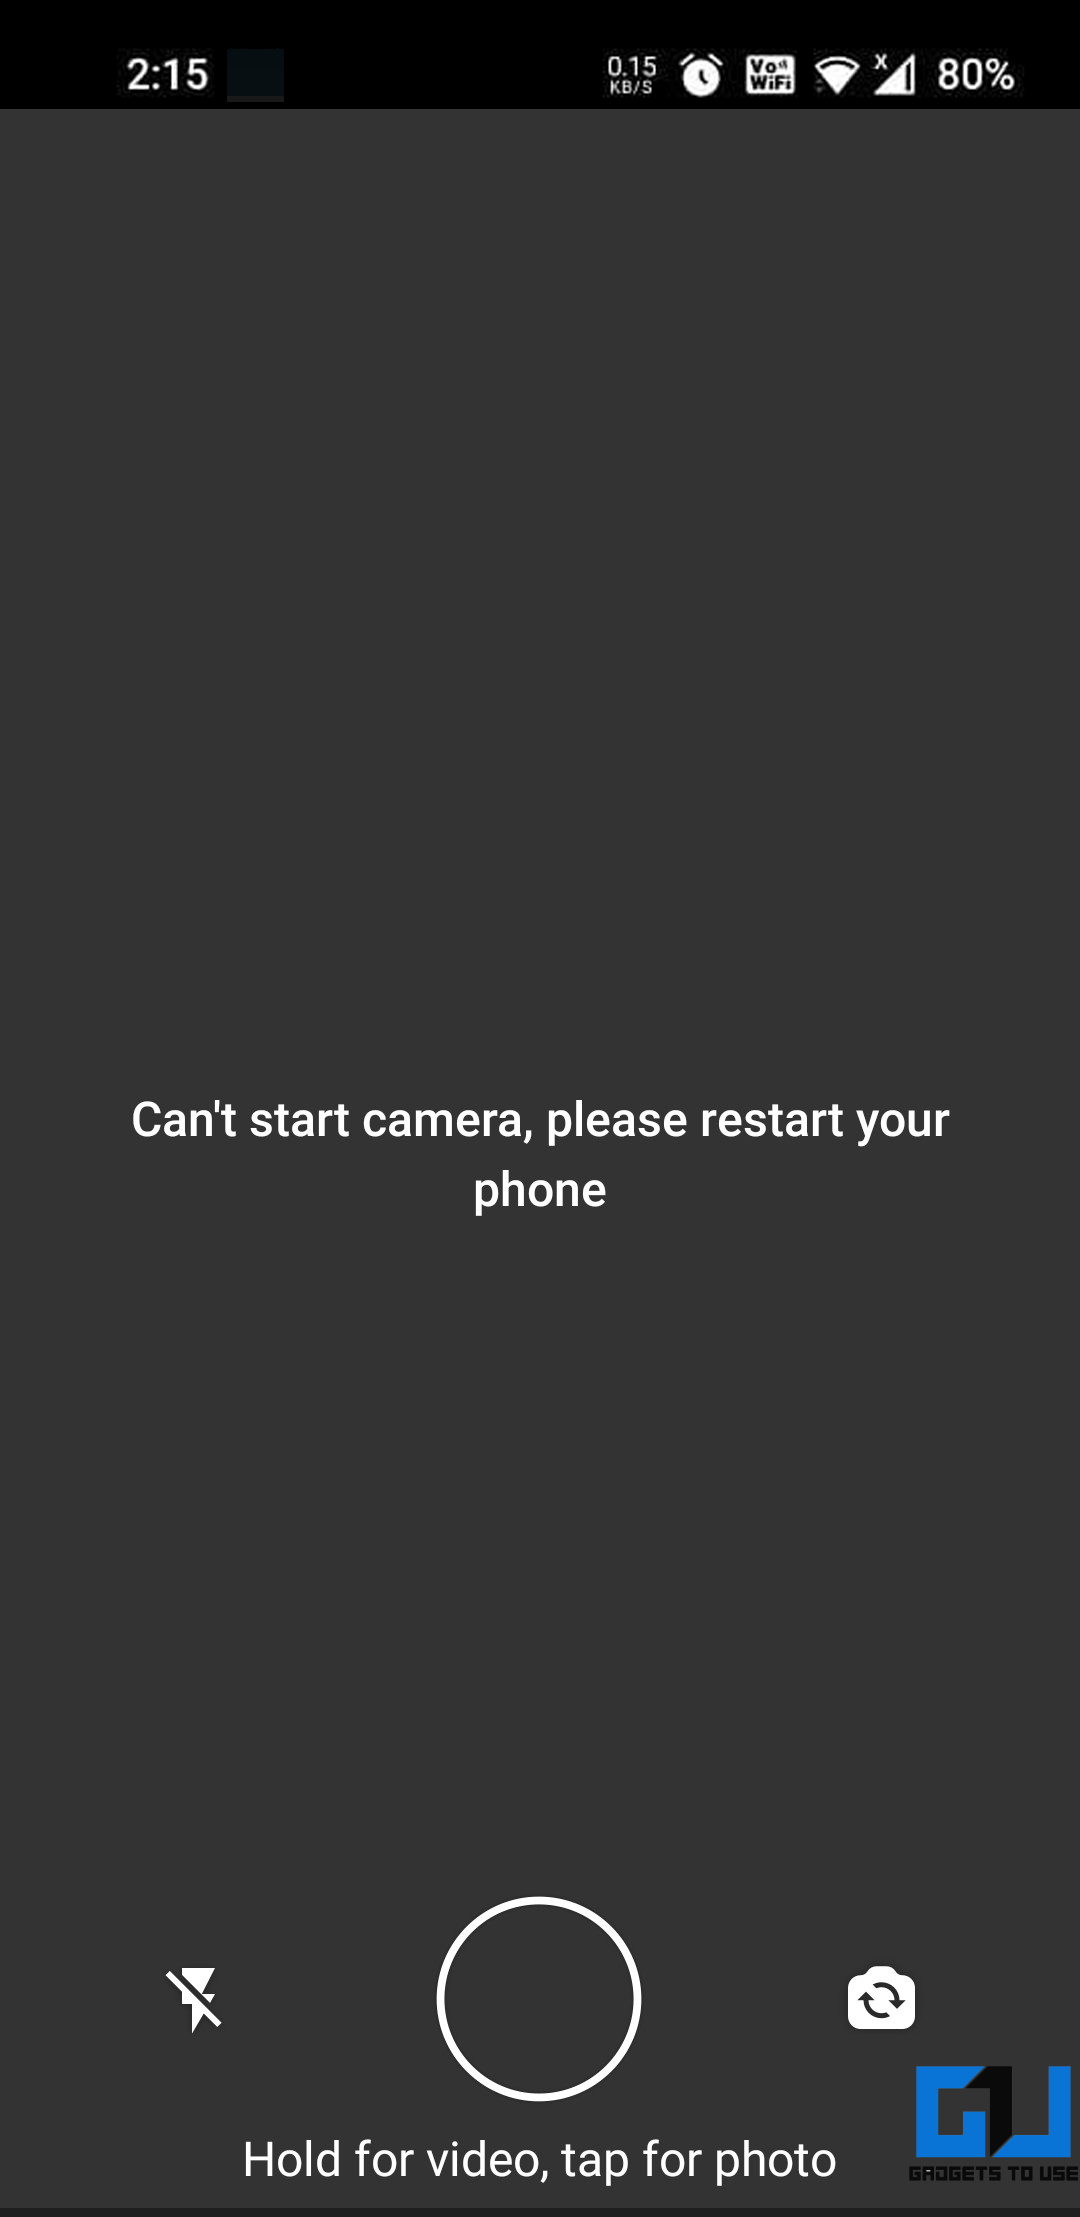 Can't Start Camera Please Restart Your Phone in Whatsapp